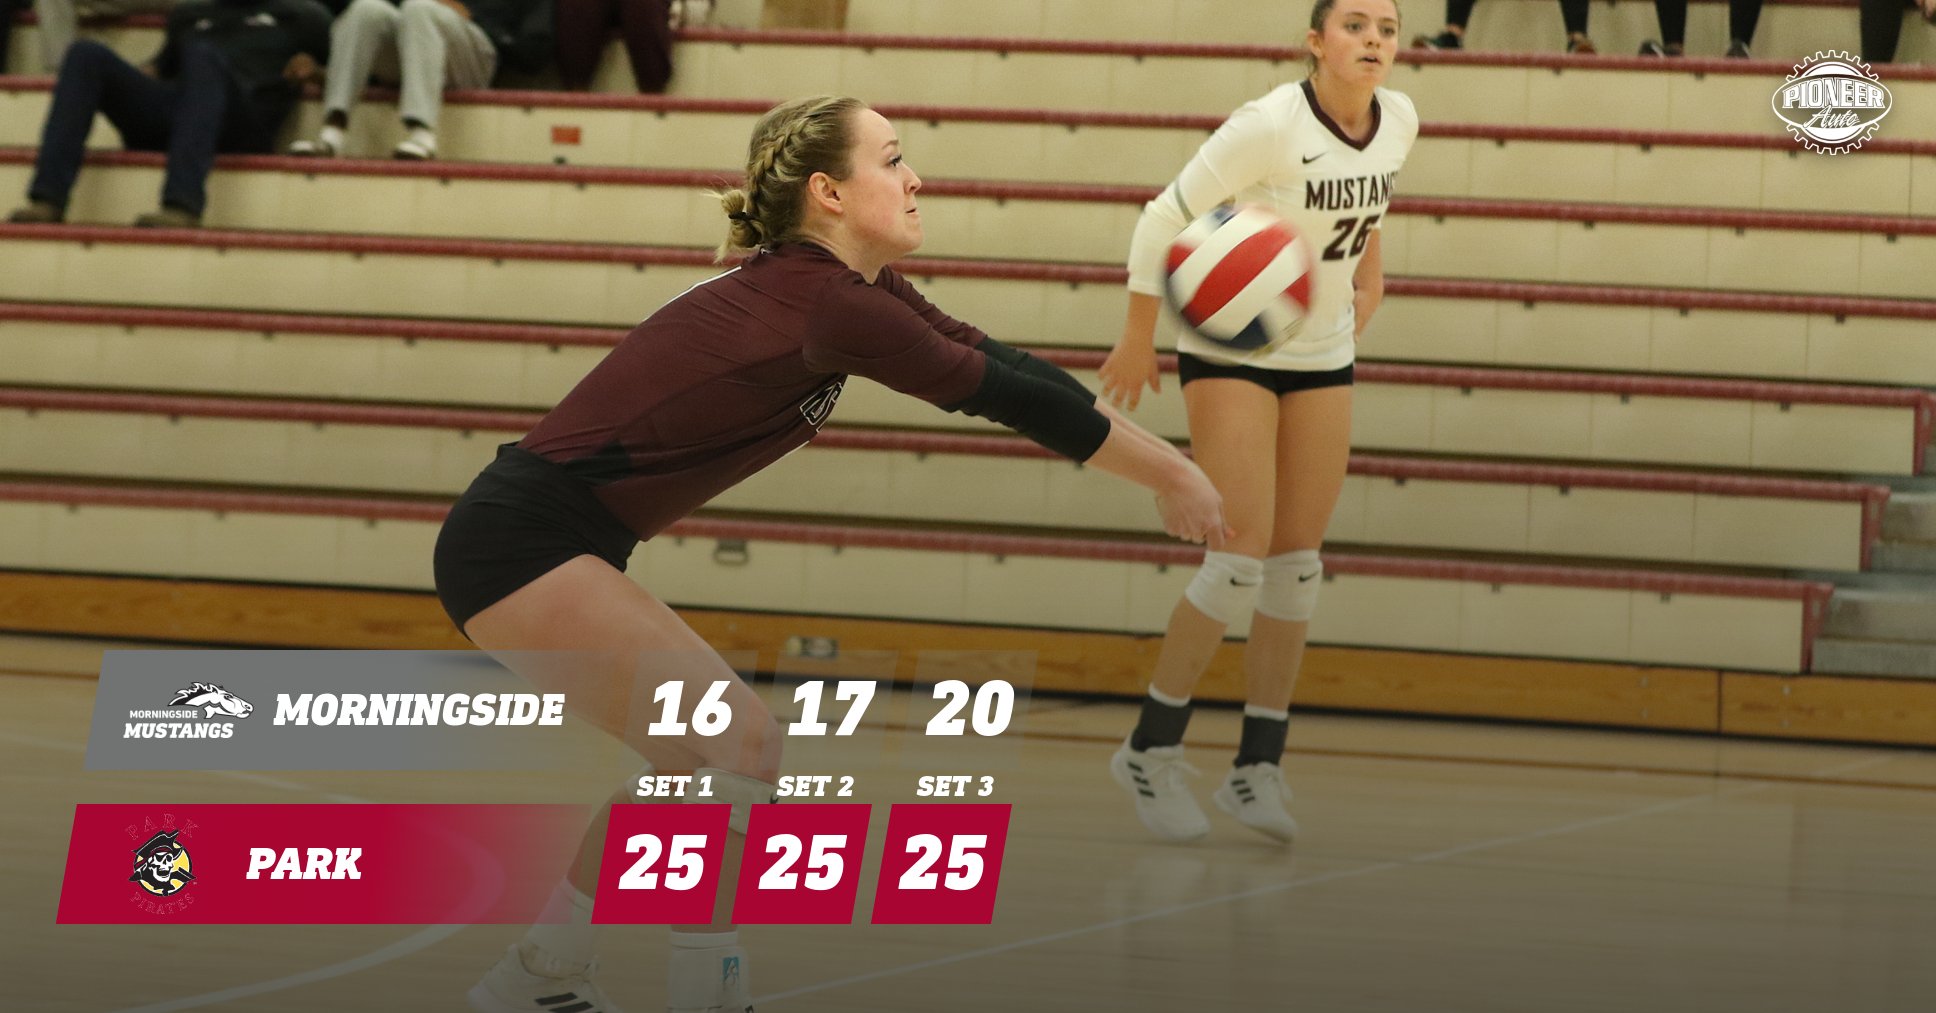 Women's volleyball competes with number 6 Park, but is unable to come away with a win, losing 25-16, 25-17, 25-20.